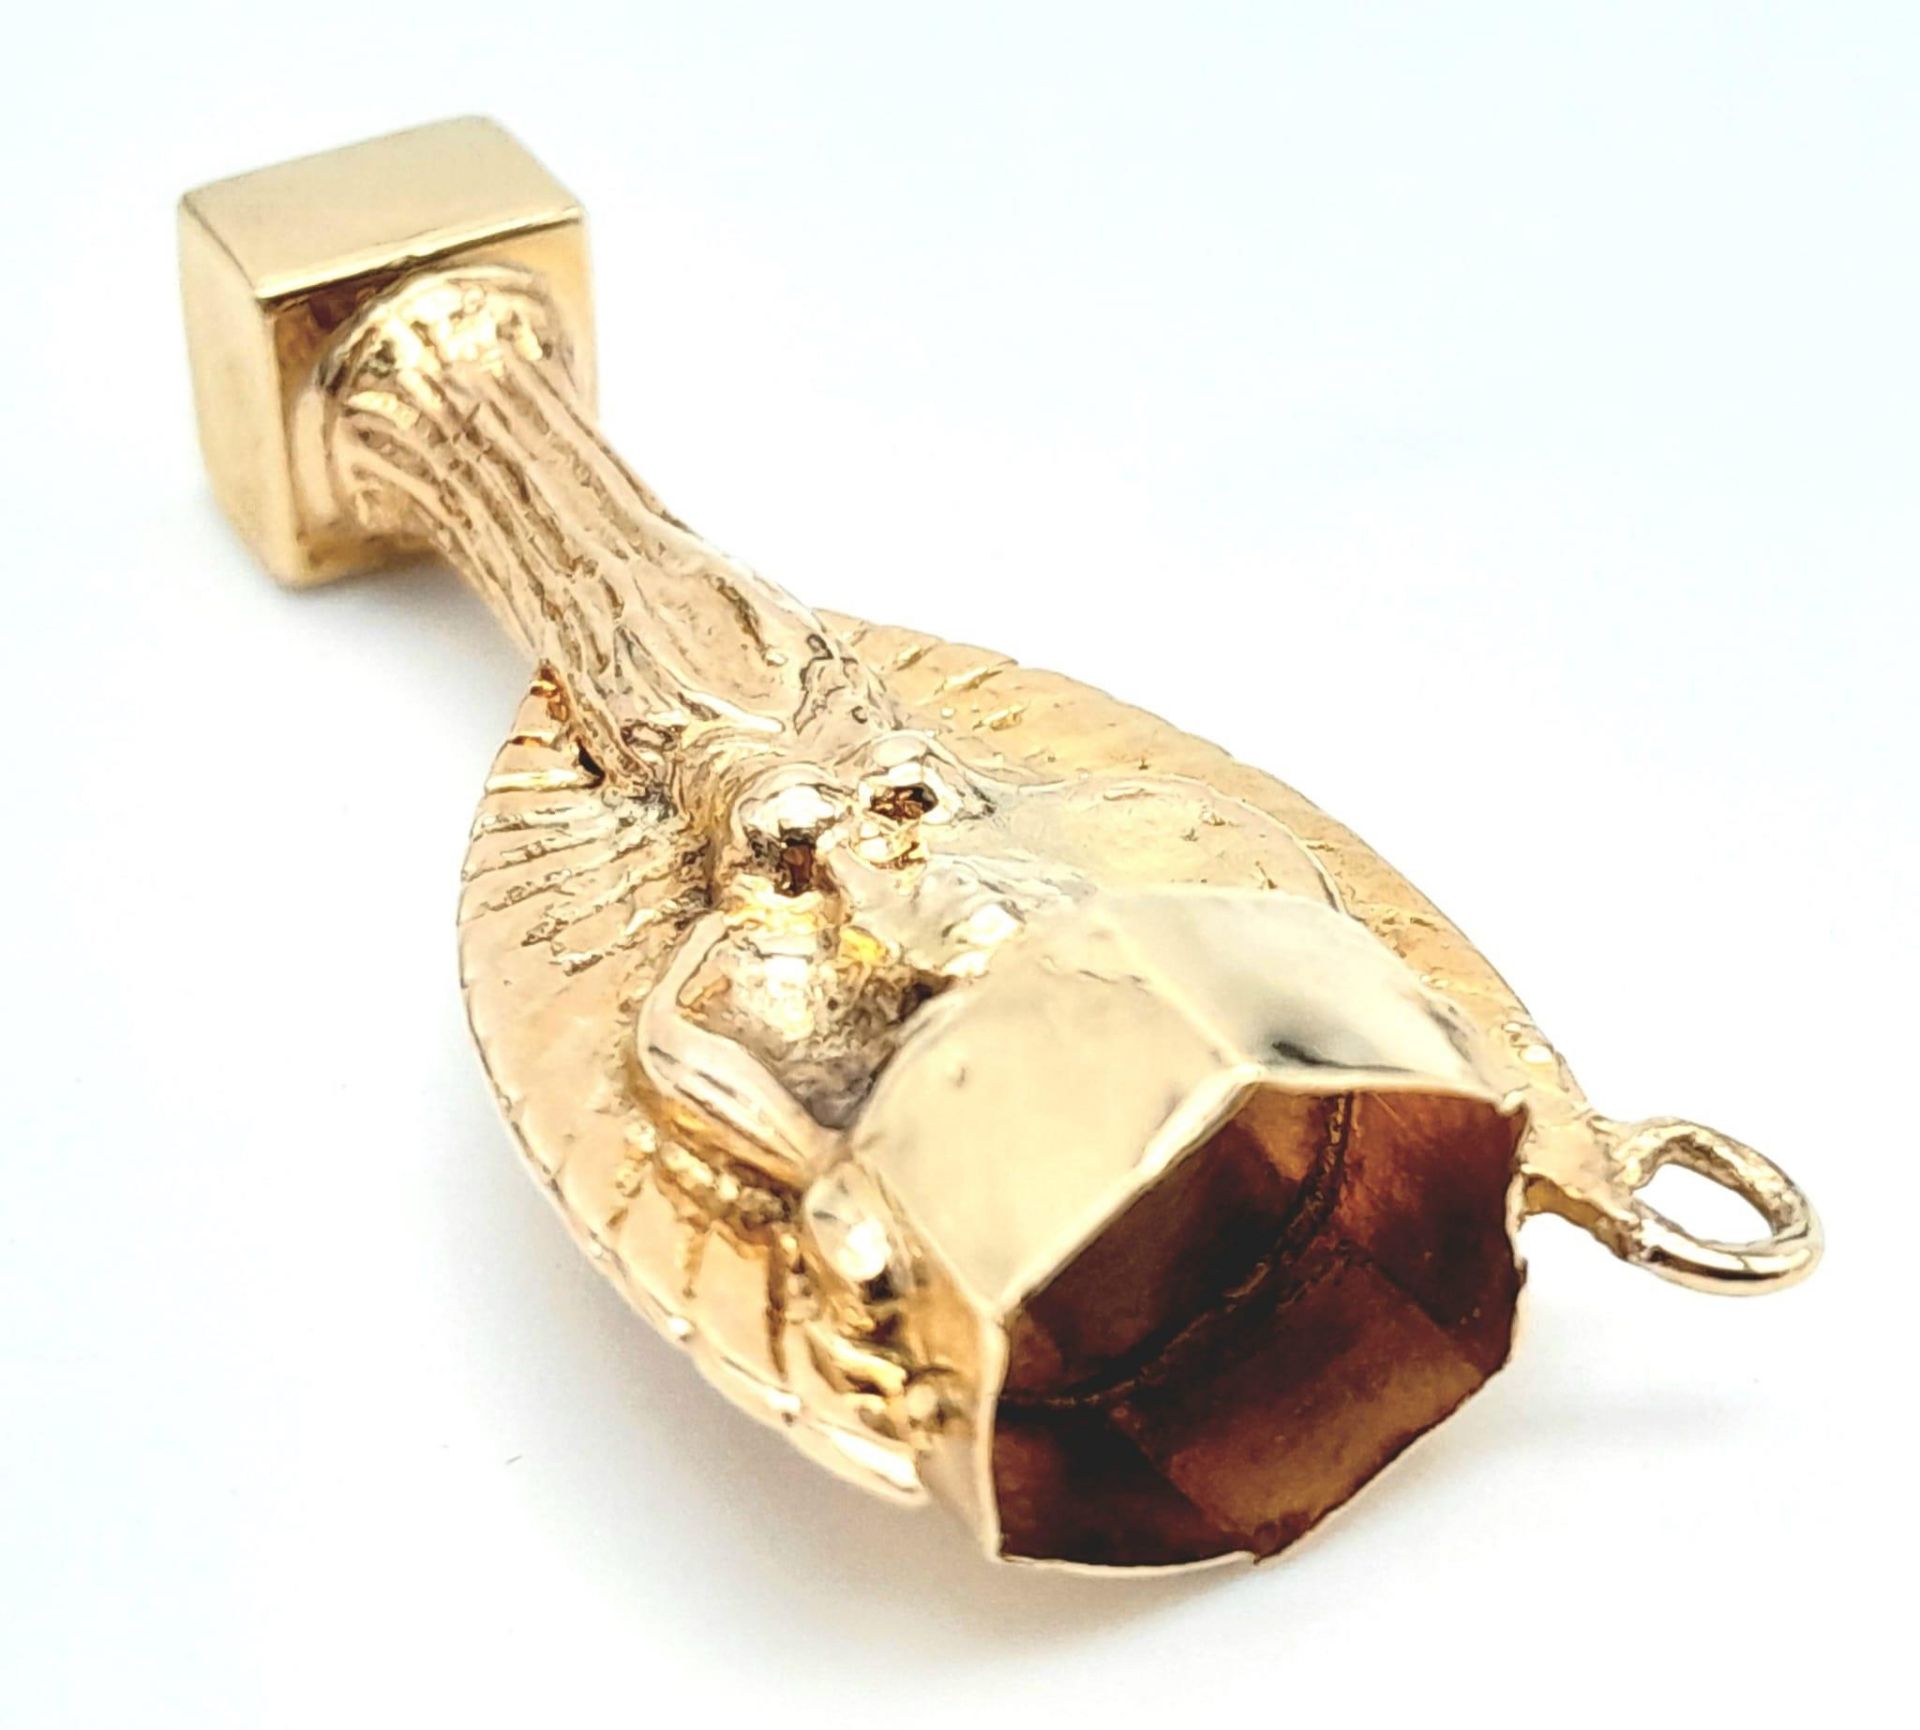 A 9K Yellow Gold World Cup Charm/Pendant, Old Jules Rimet Trophy. 3.5cm length, 5.7g weight. Ref: SC - Image 3 of 6